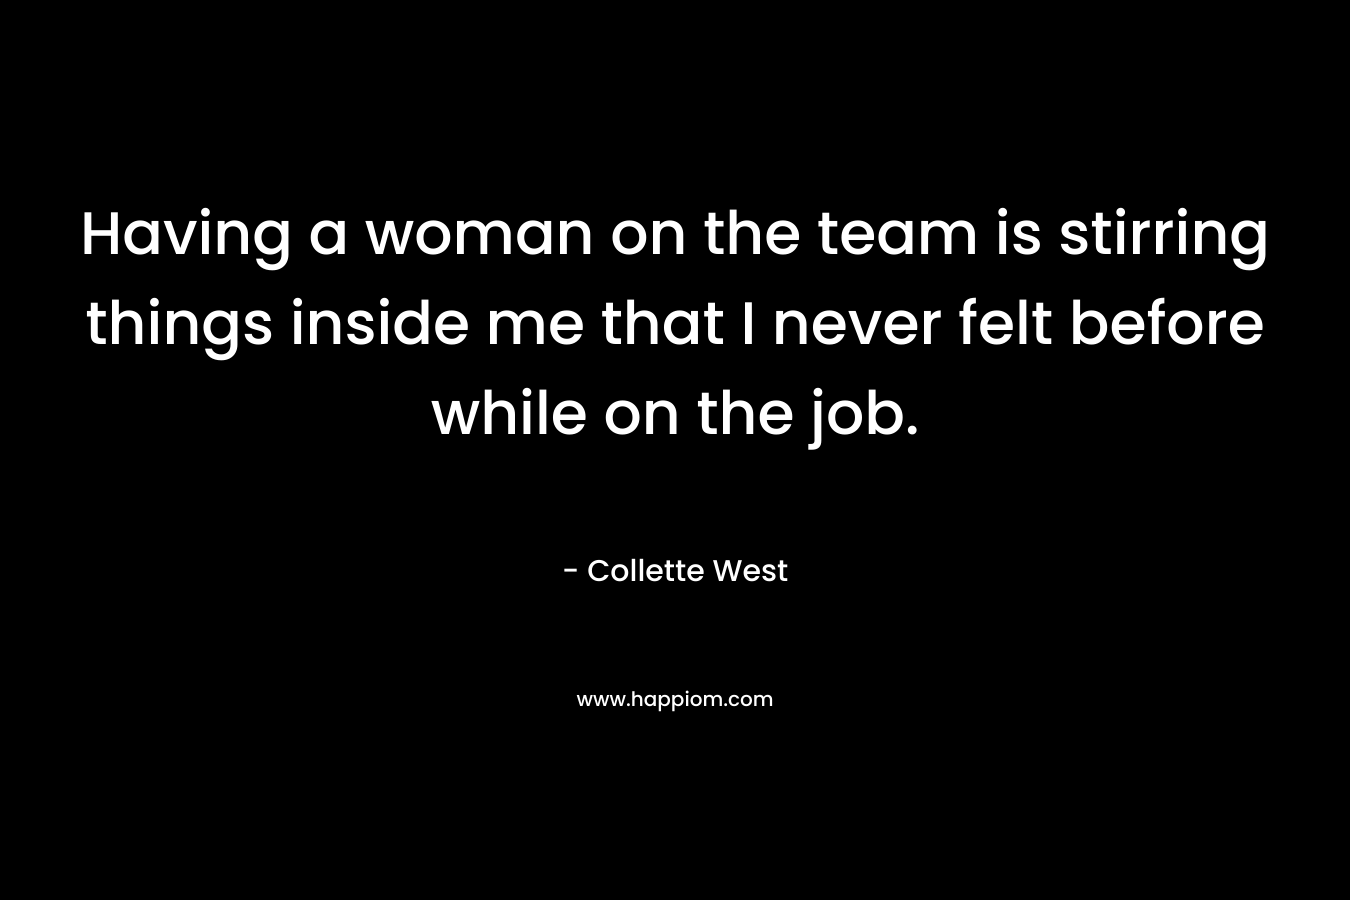 Having a woman on the team is stirring things inside me that I never felt before while on the job. – Collette West